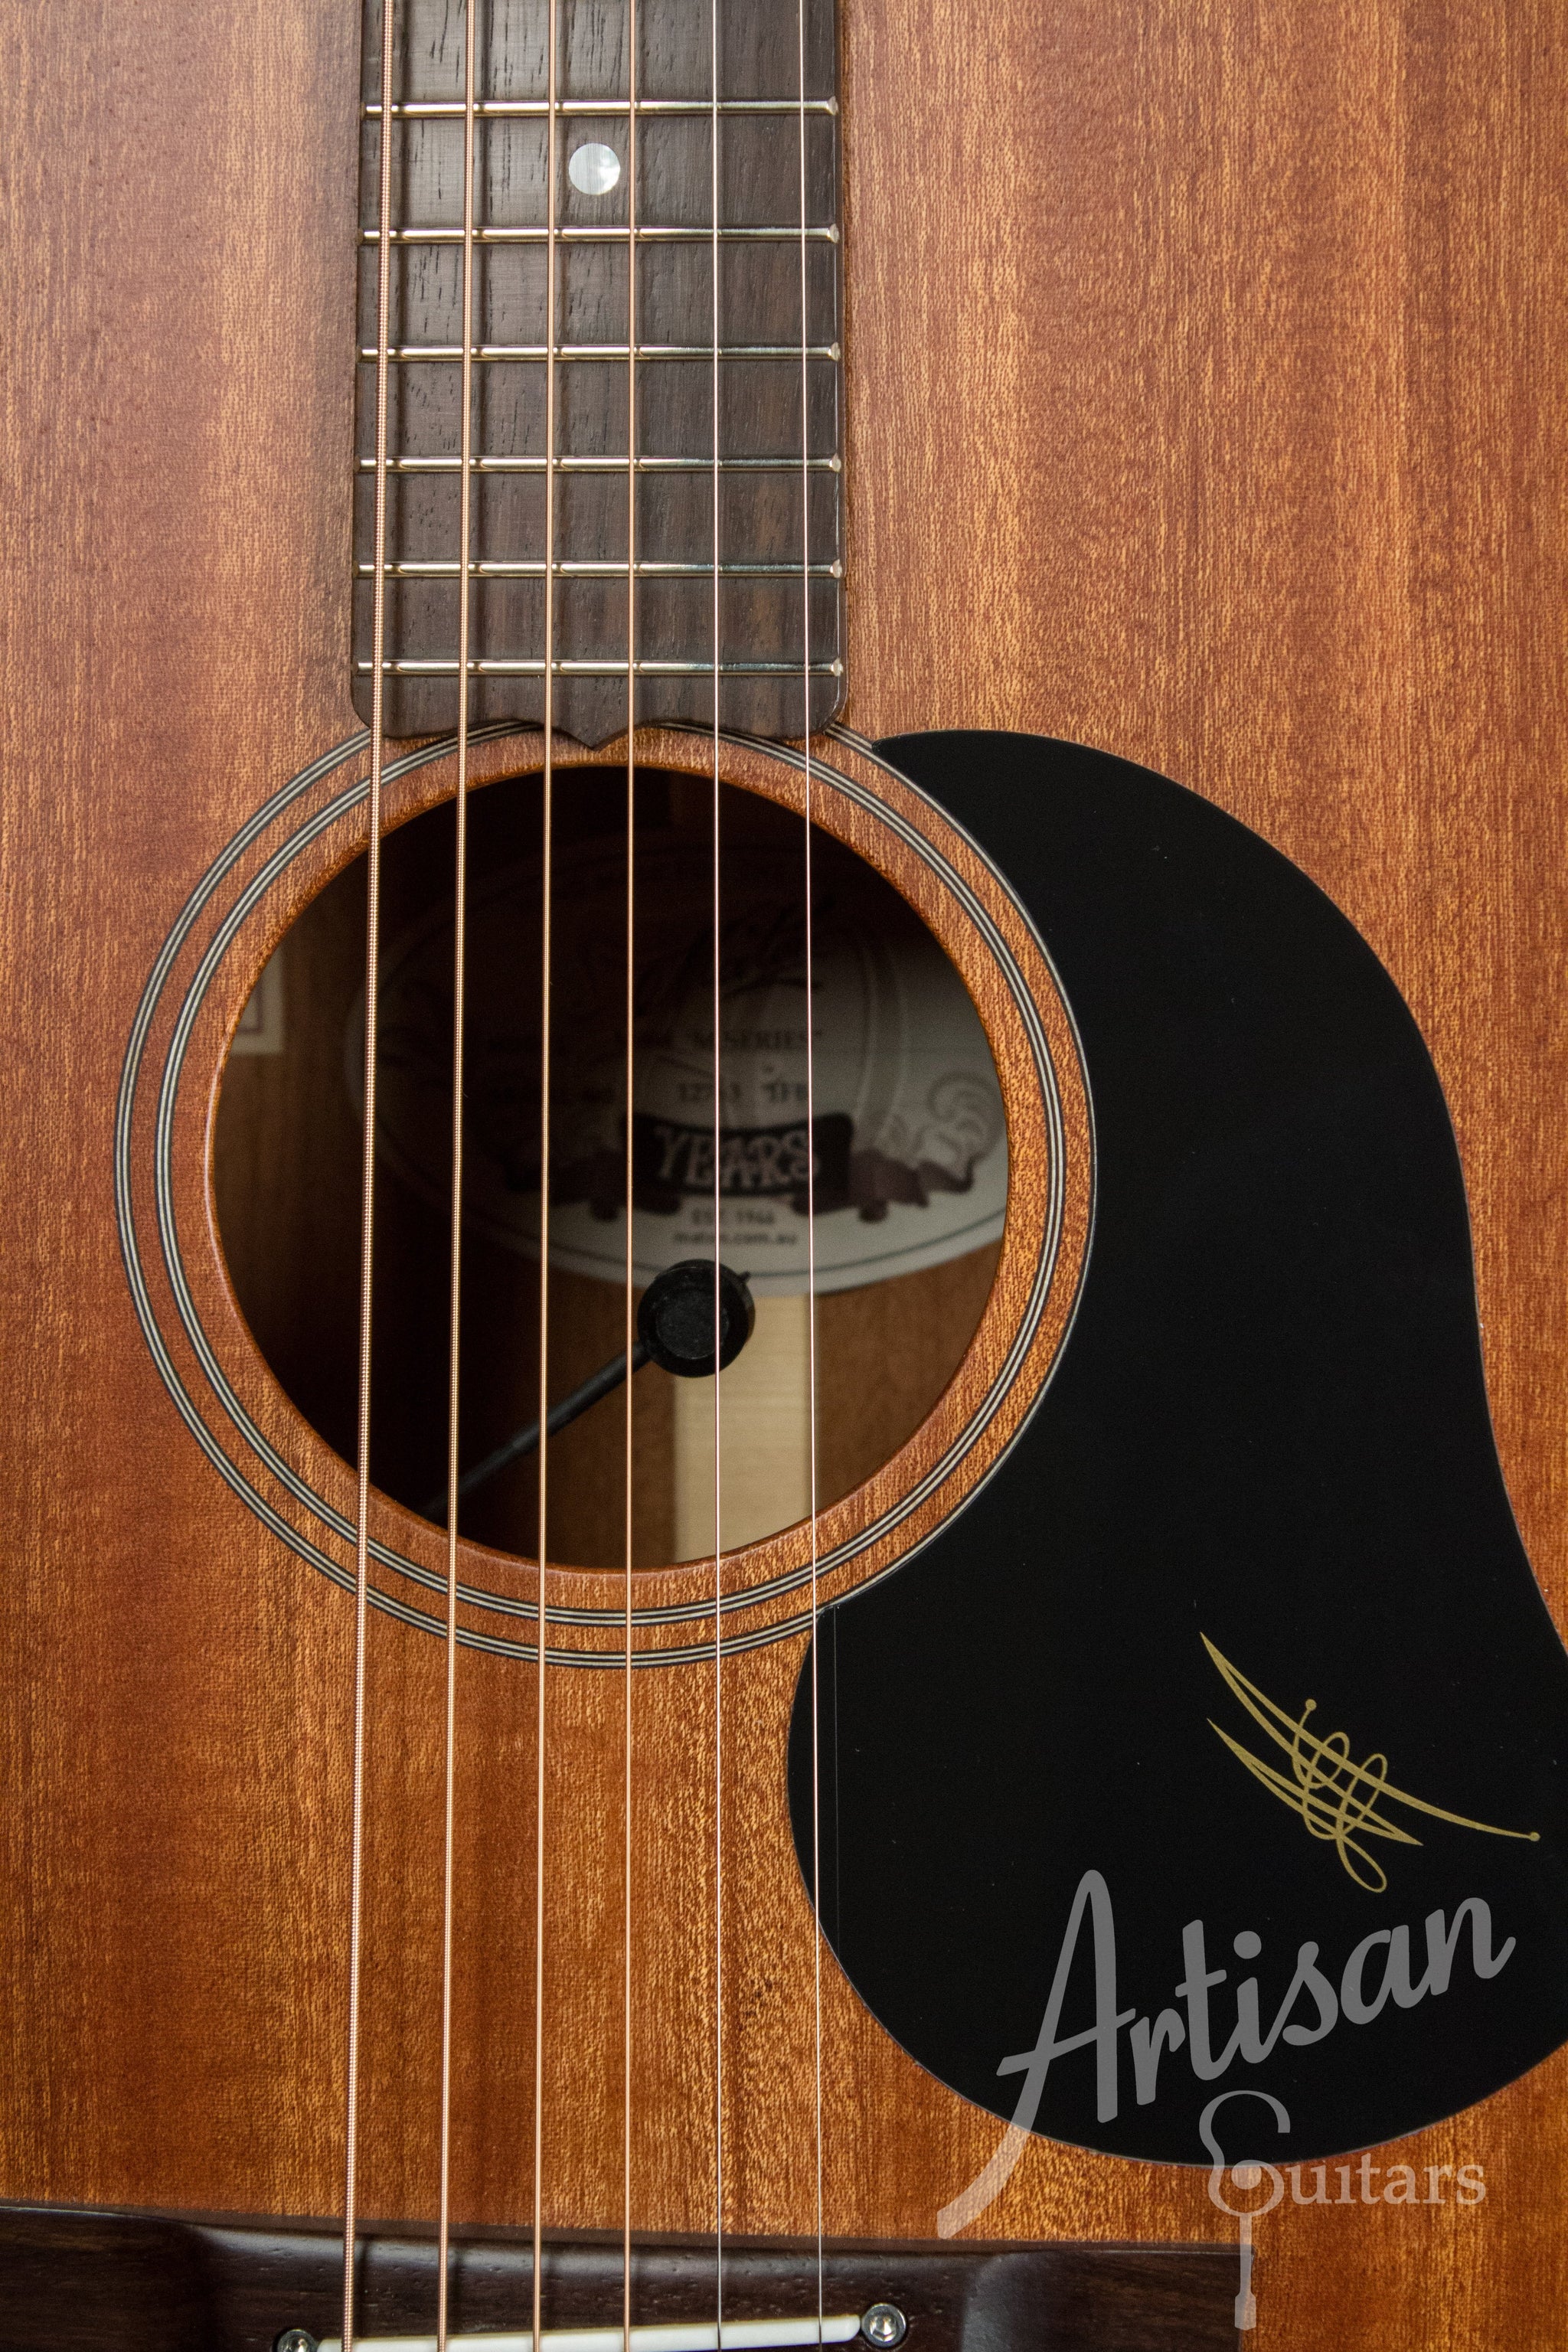 Maton M808 Guitar Sapele Top, Back, and Sides with AP5 Pro Pickup Pre-Owned 2016 ID-11117 - Artisan Guitars